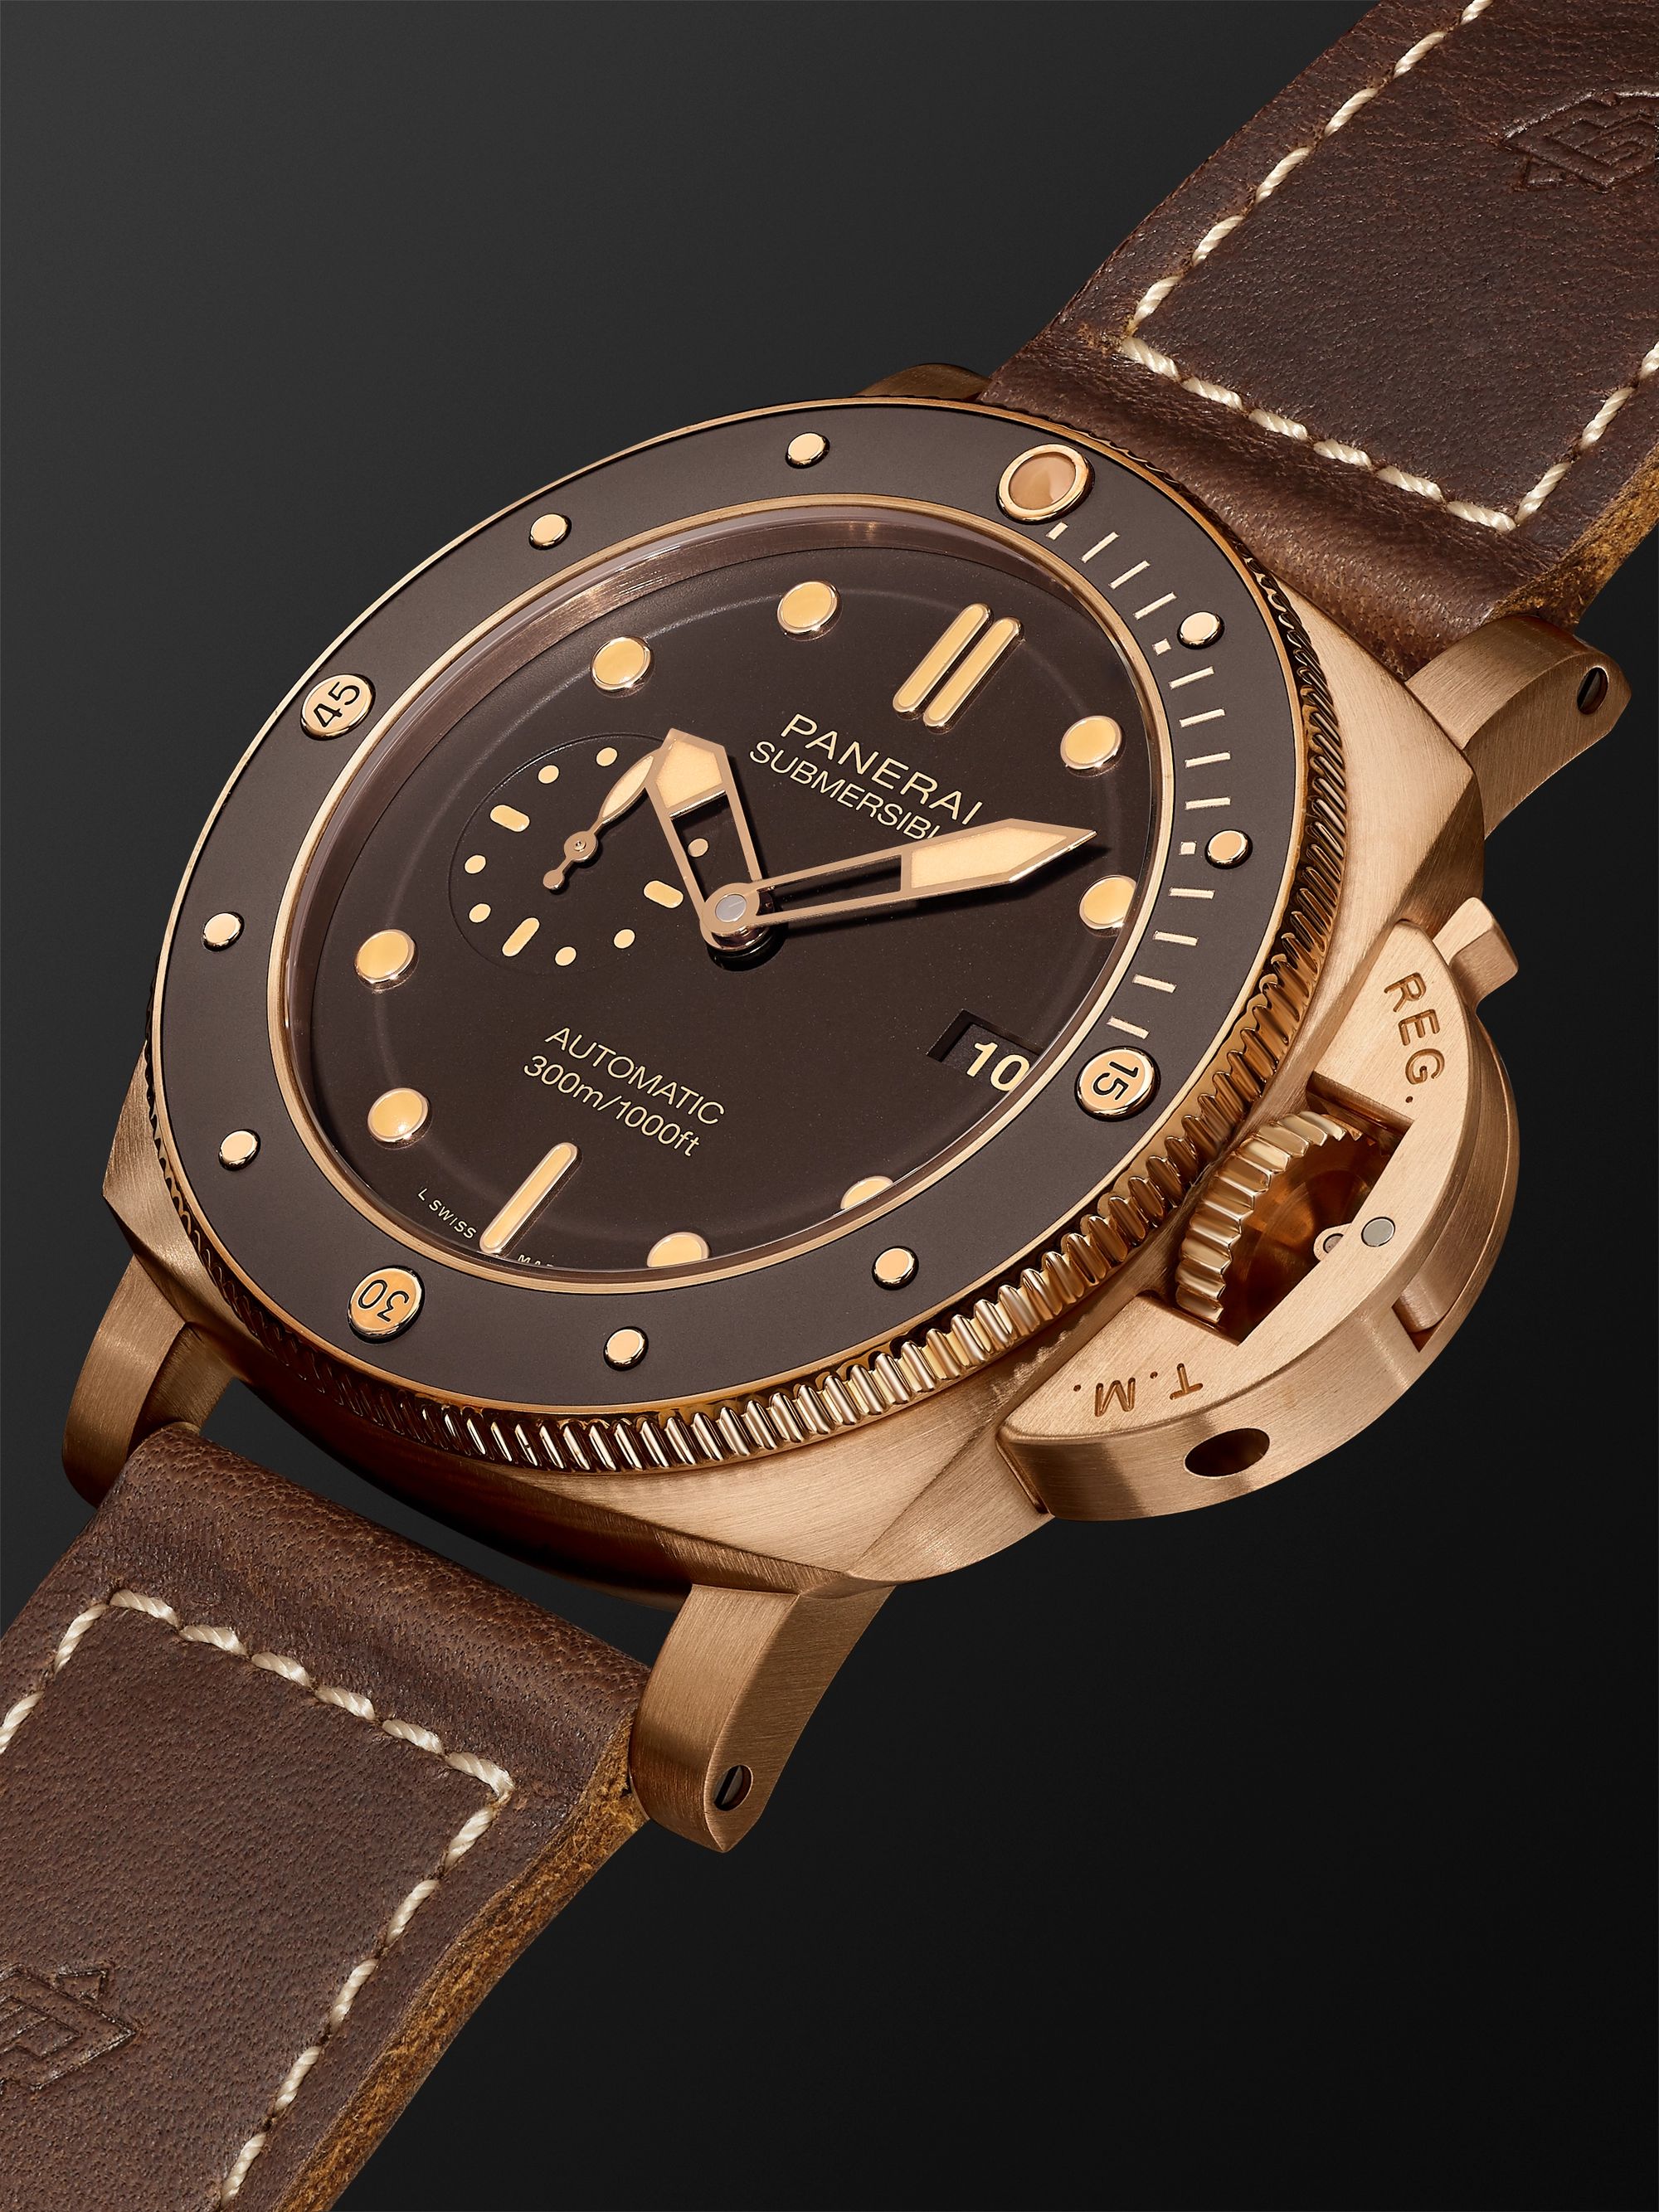 PANERAI Submersible Automatic 47mm Bronze and Leather Watch